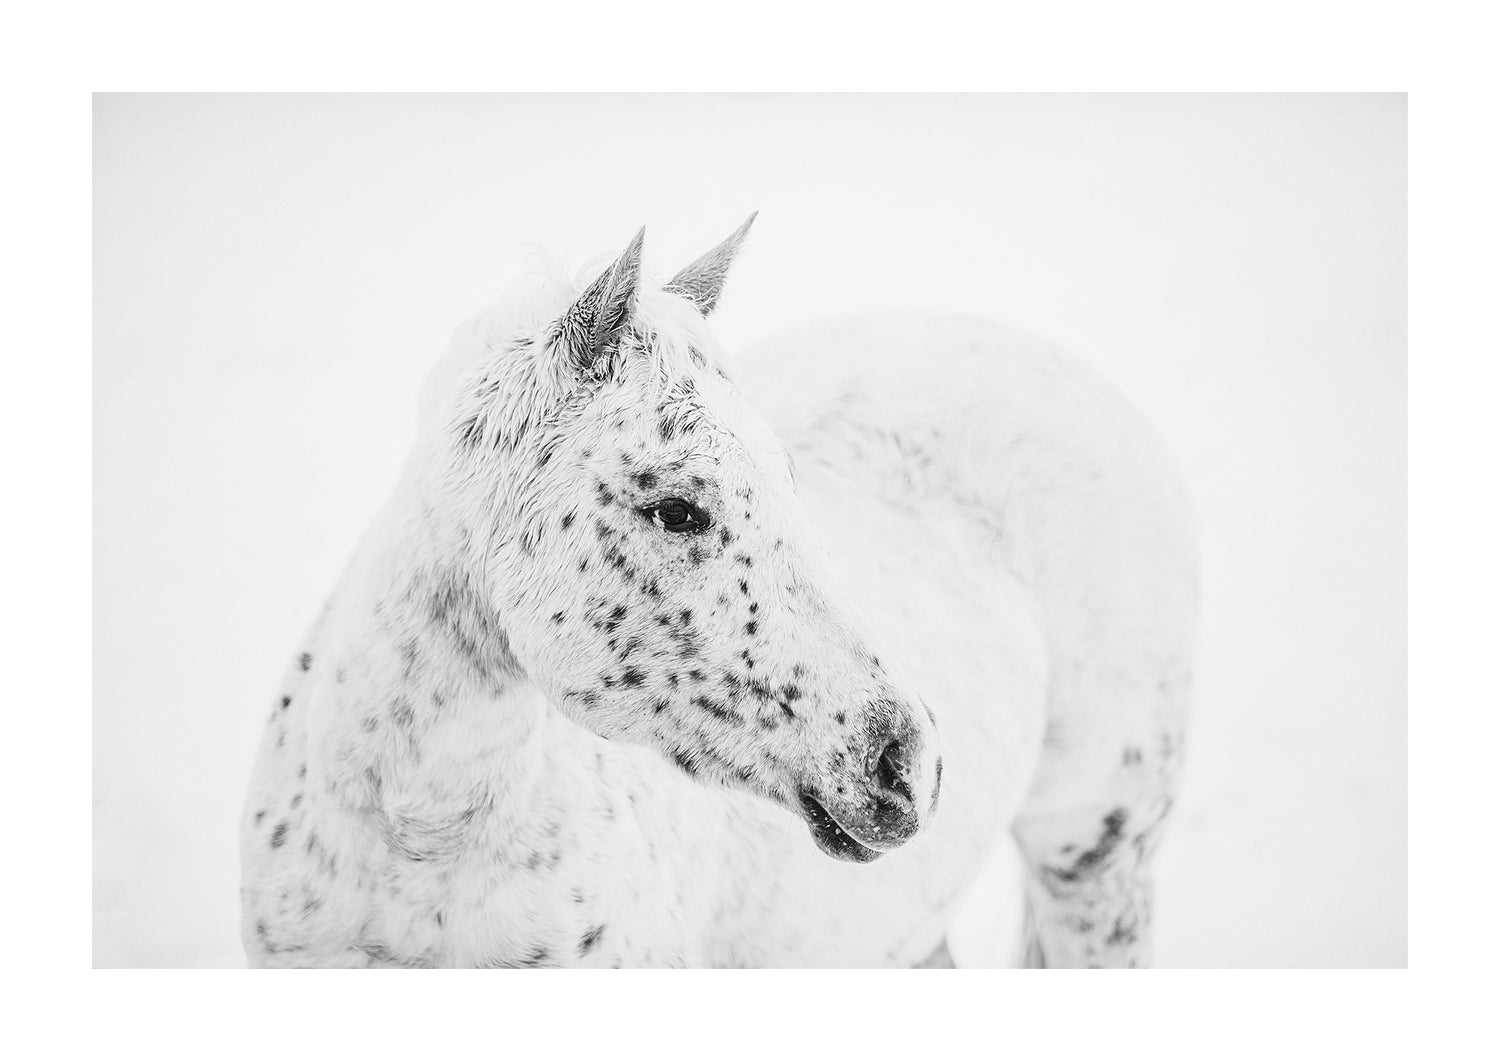 "Freckles" Black and white photo of an appaloosa horse in the snow